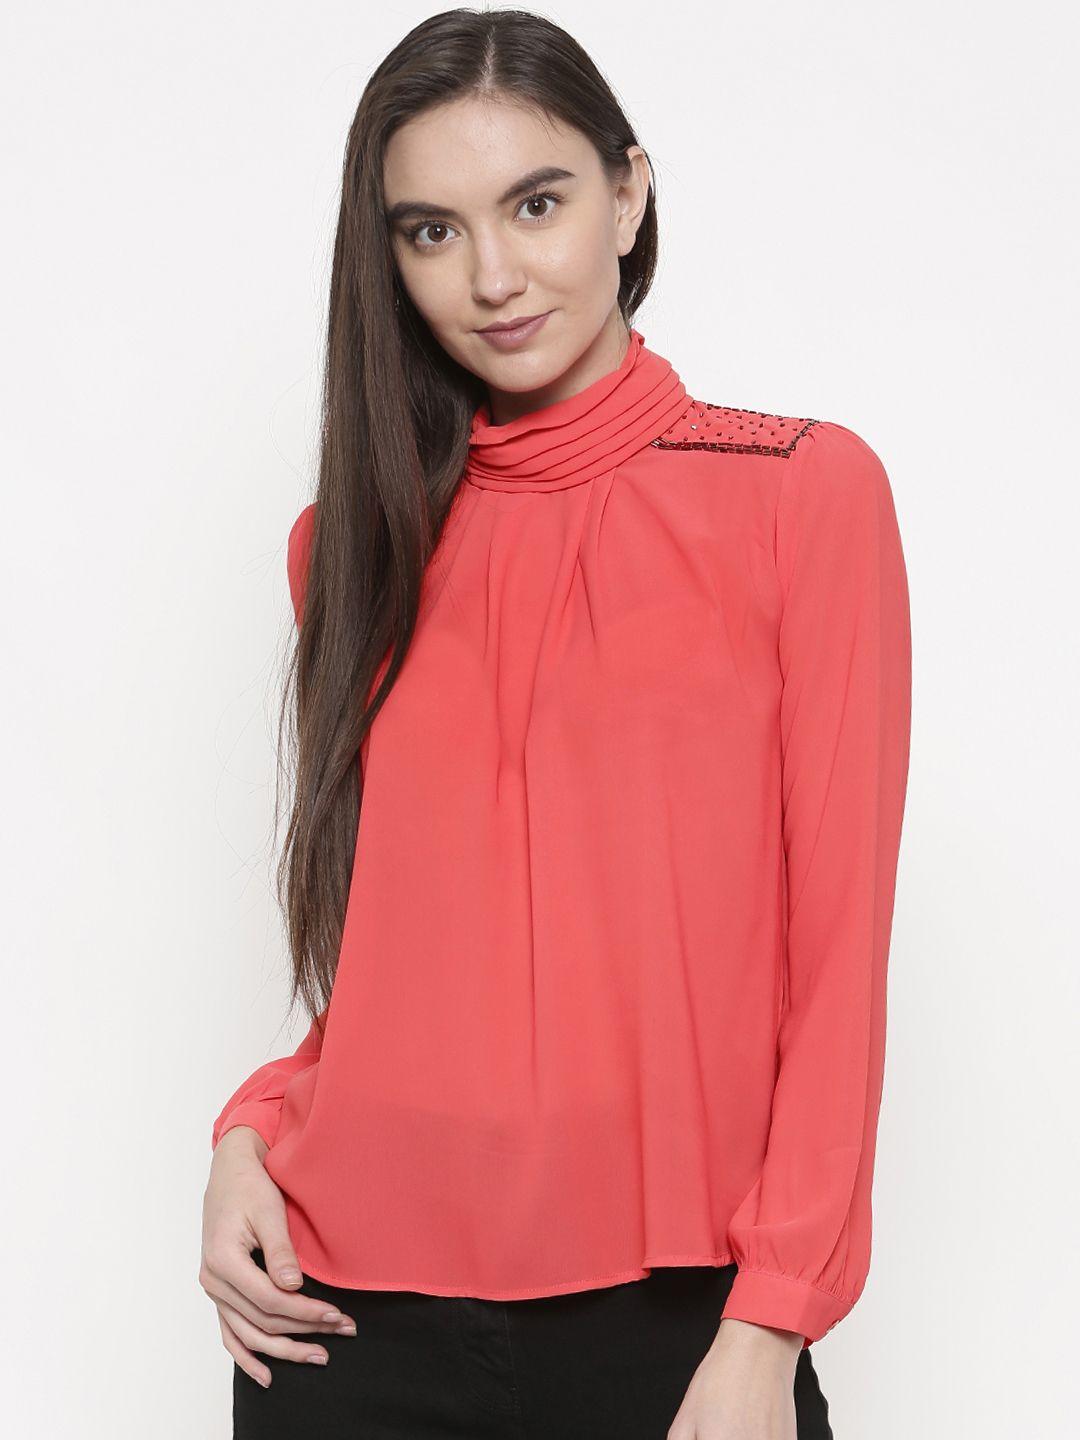 deal-jeans-women-coral-red-solid-top